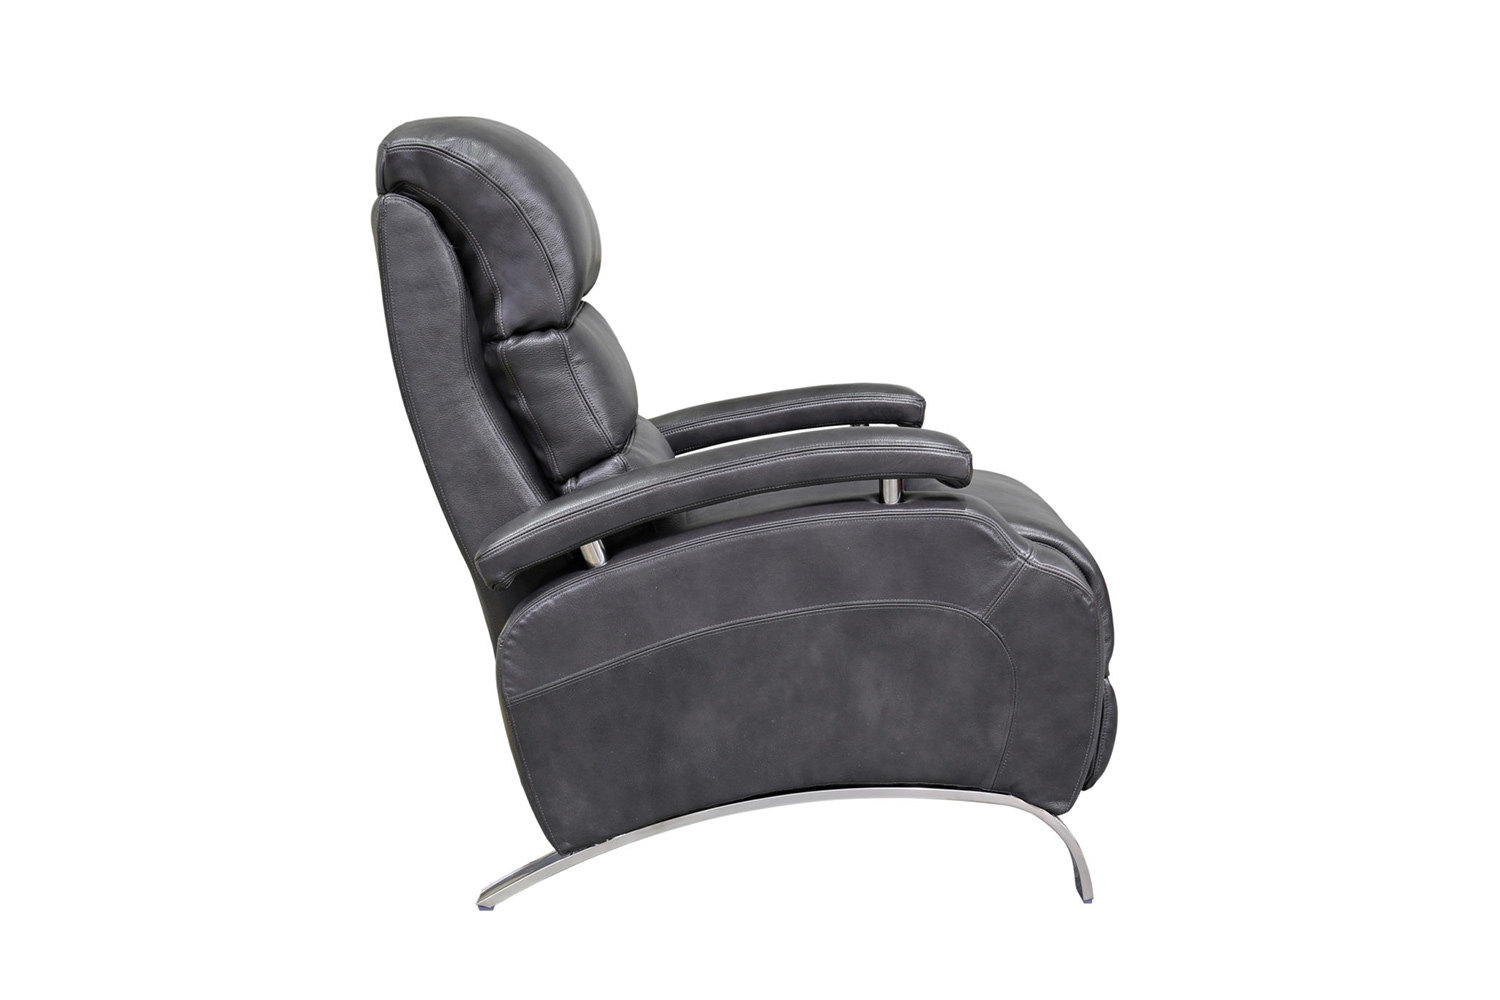 Barcalounger Giovanni Recliner Chair - Wrenn Gray/all leather